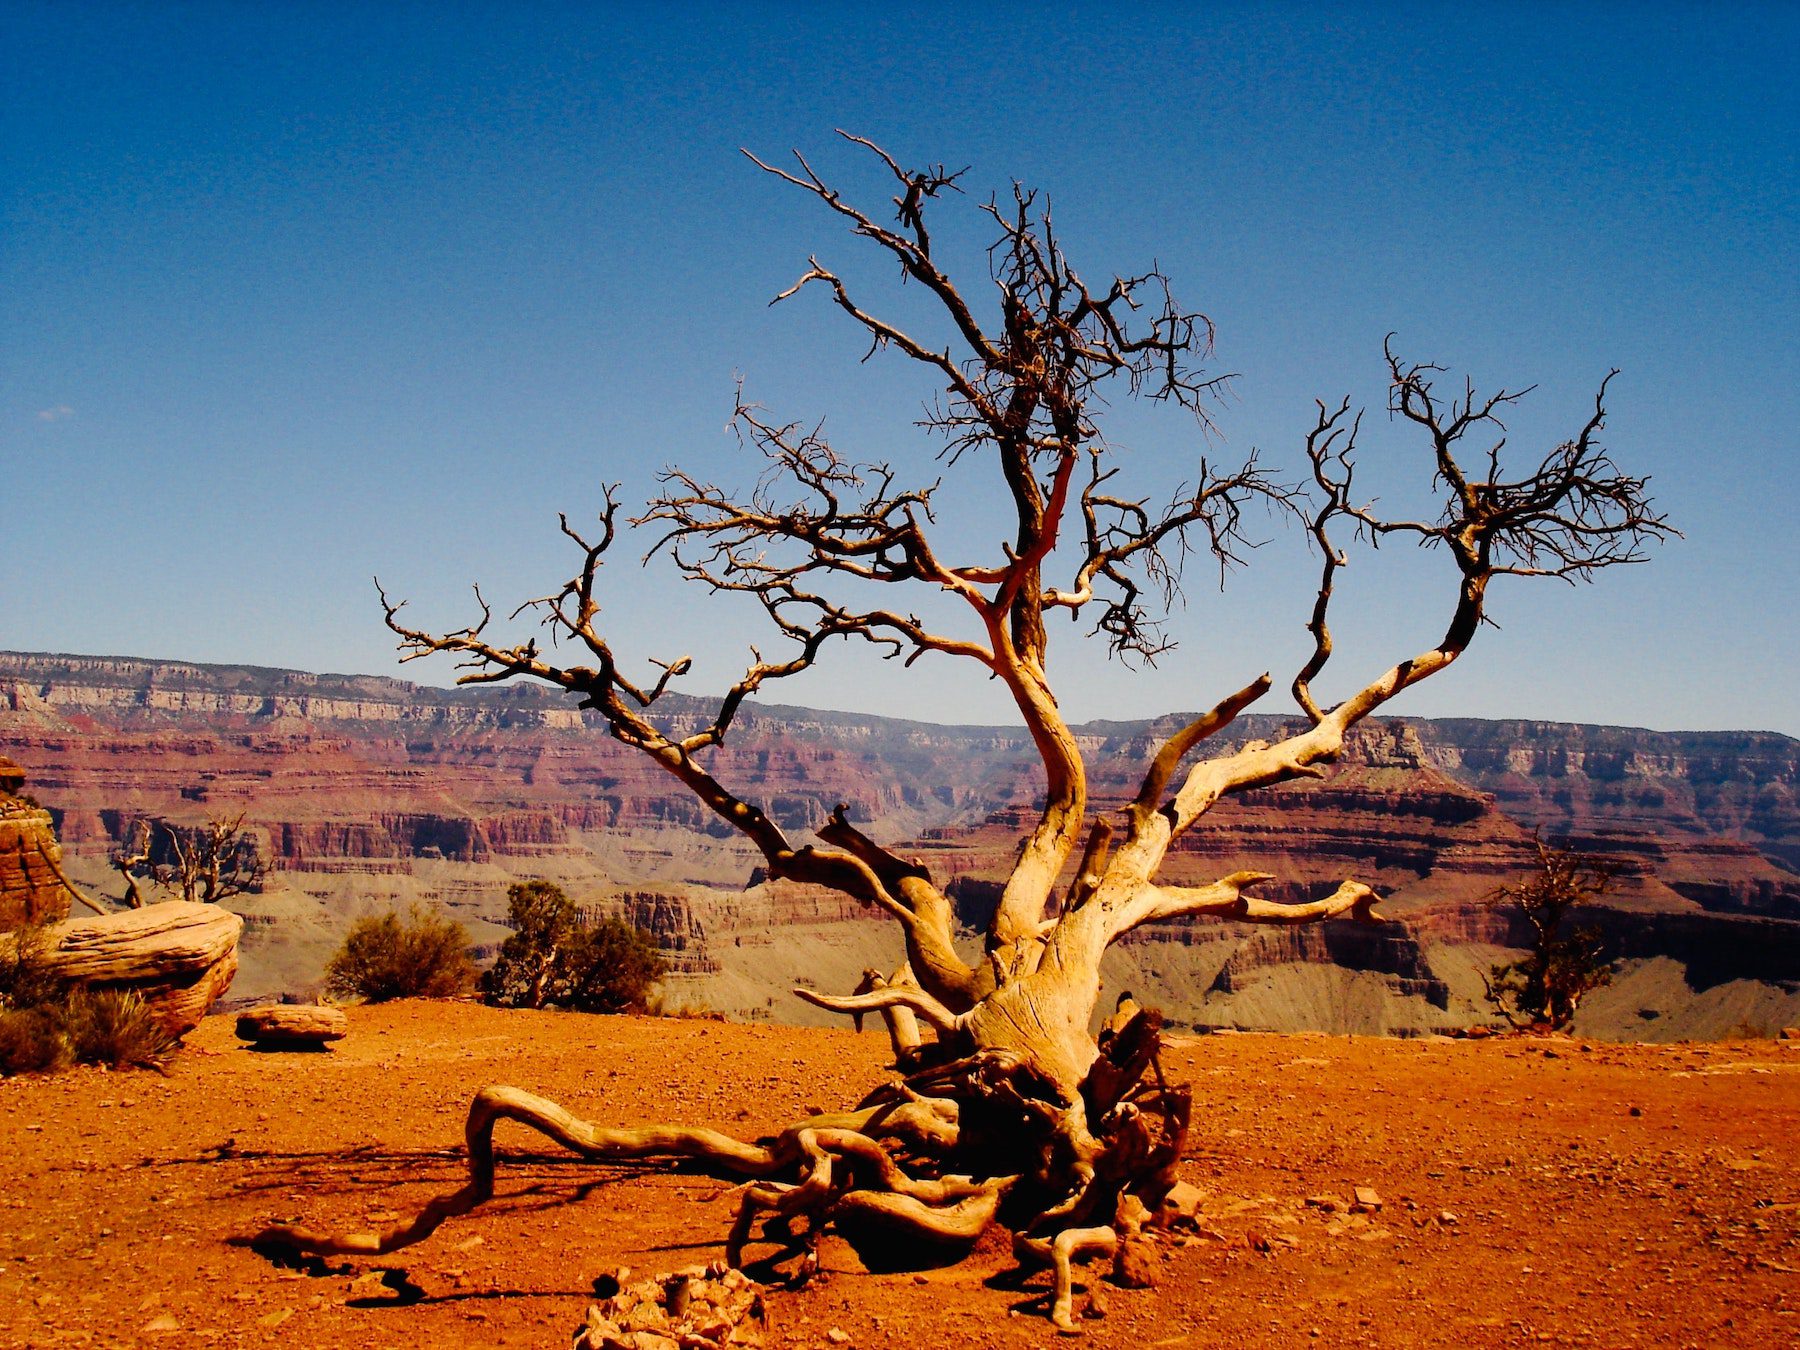 A tree with breached roots and twisted limbs from the elements in a desert portion of Grand Canyon National Park during the summer season.